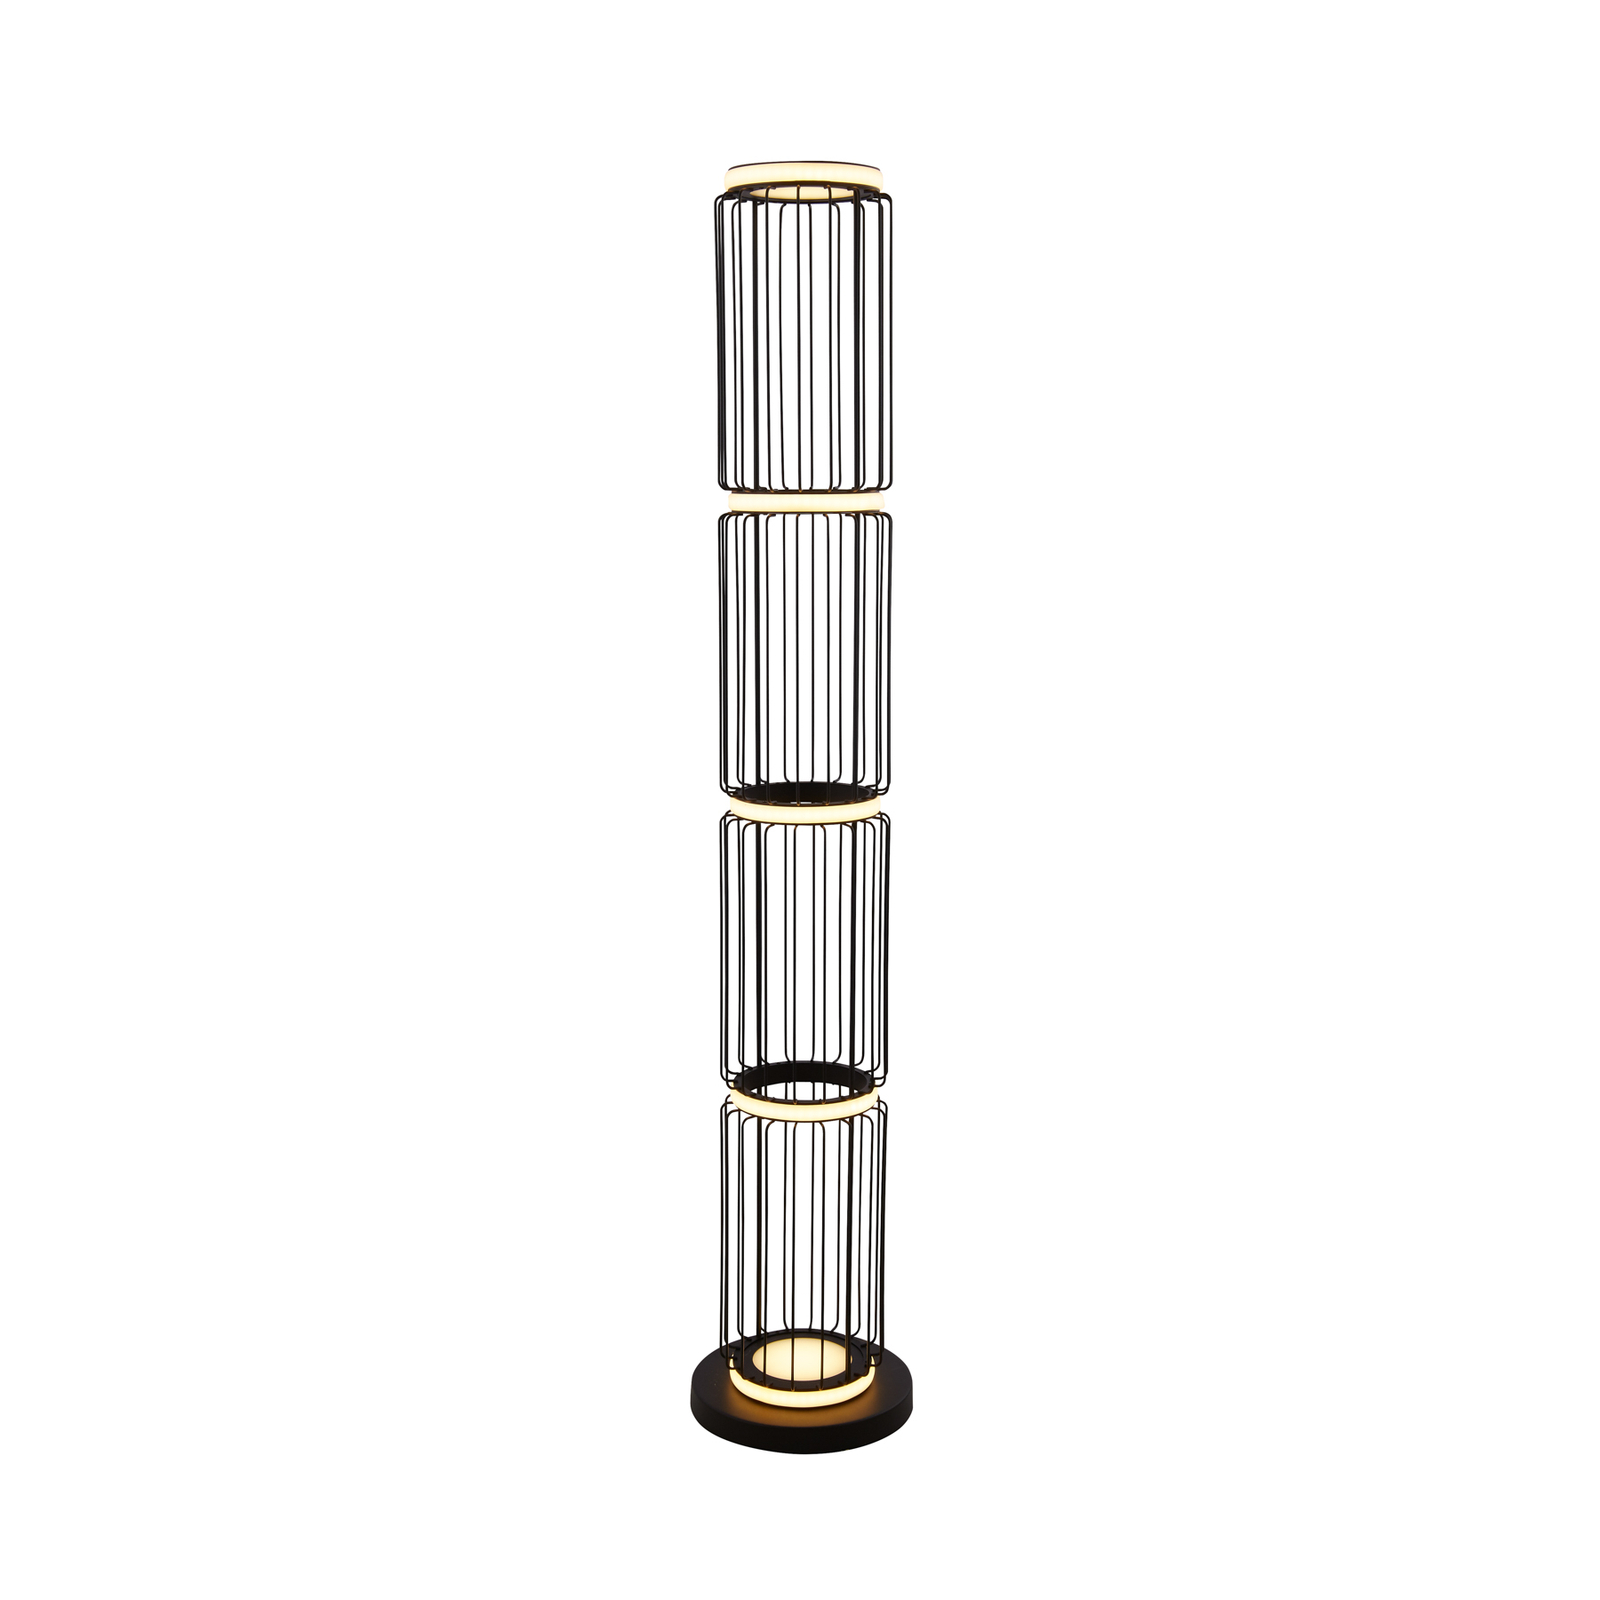 Cage LED floor lamp in cage design